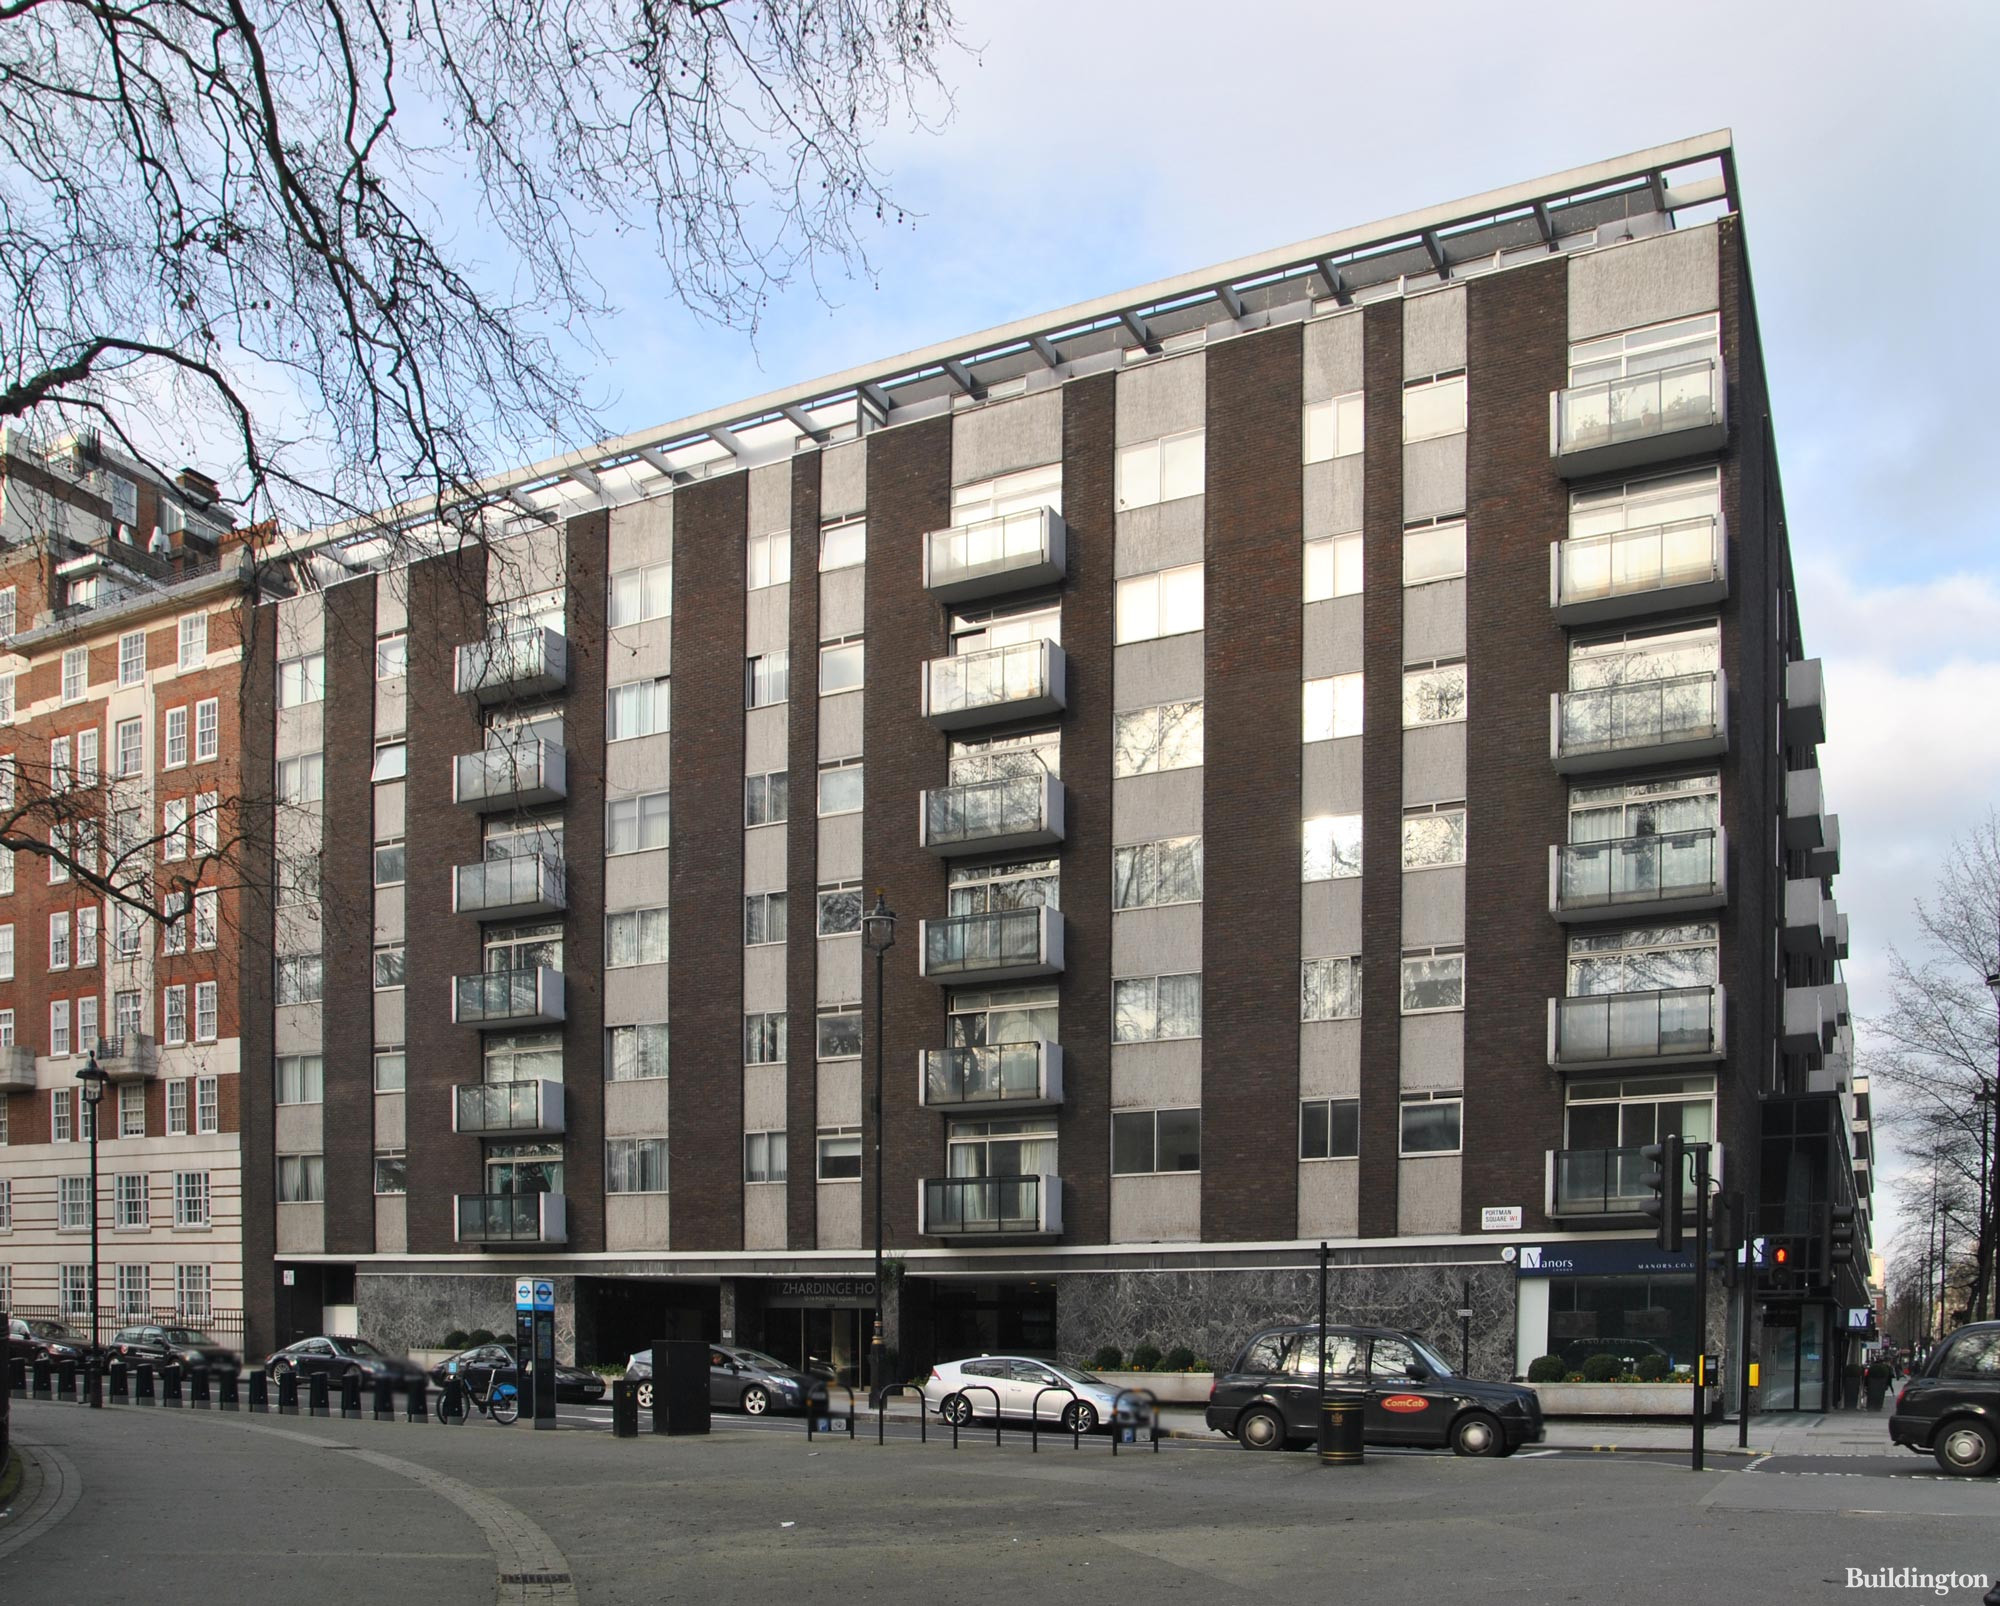 Fitzhardinge House apartment block Portman Square elevation. Manors estate agents on the ground floor of the building.